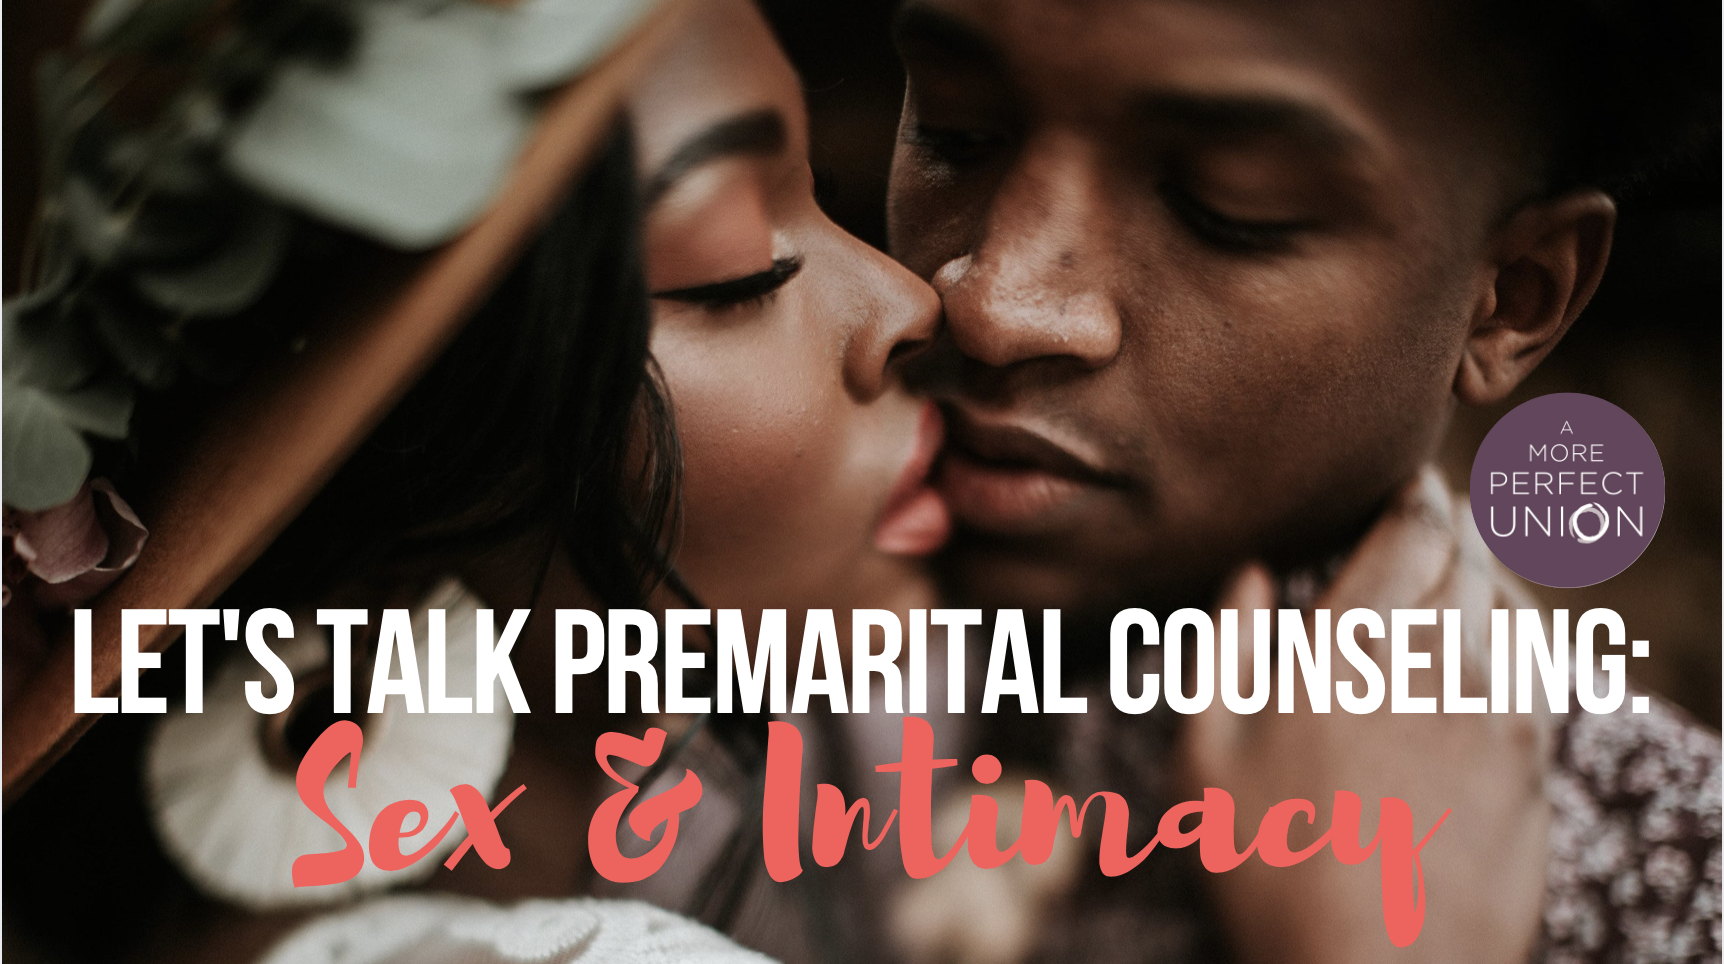 Premarital Counseling Sex and Intimacy — A More Perfect Union image